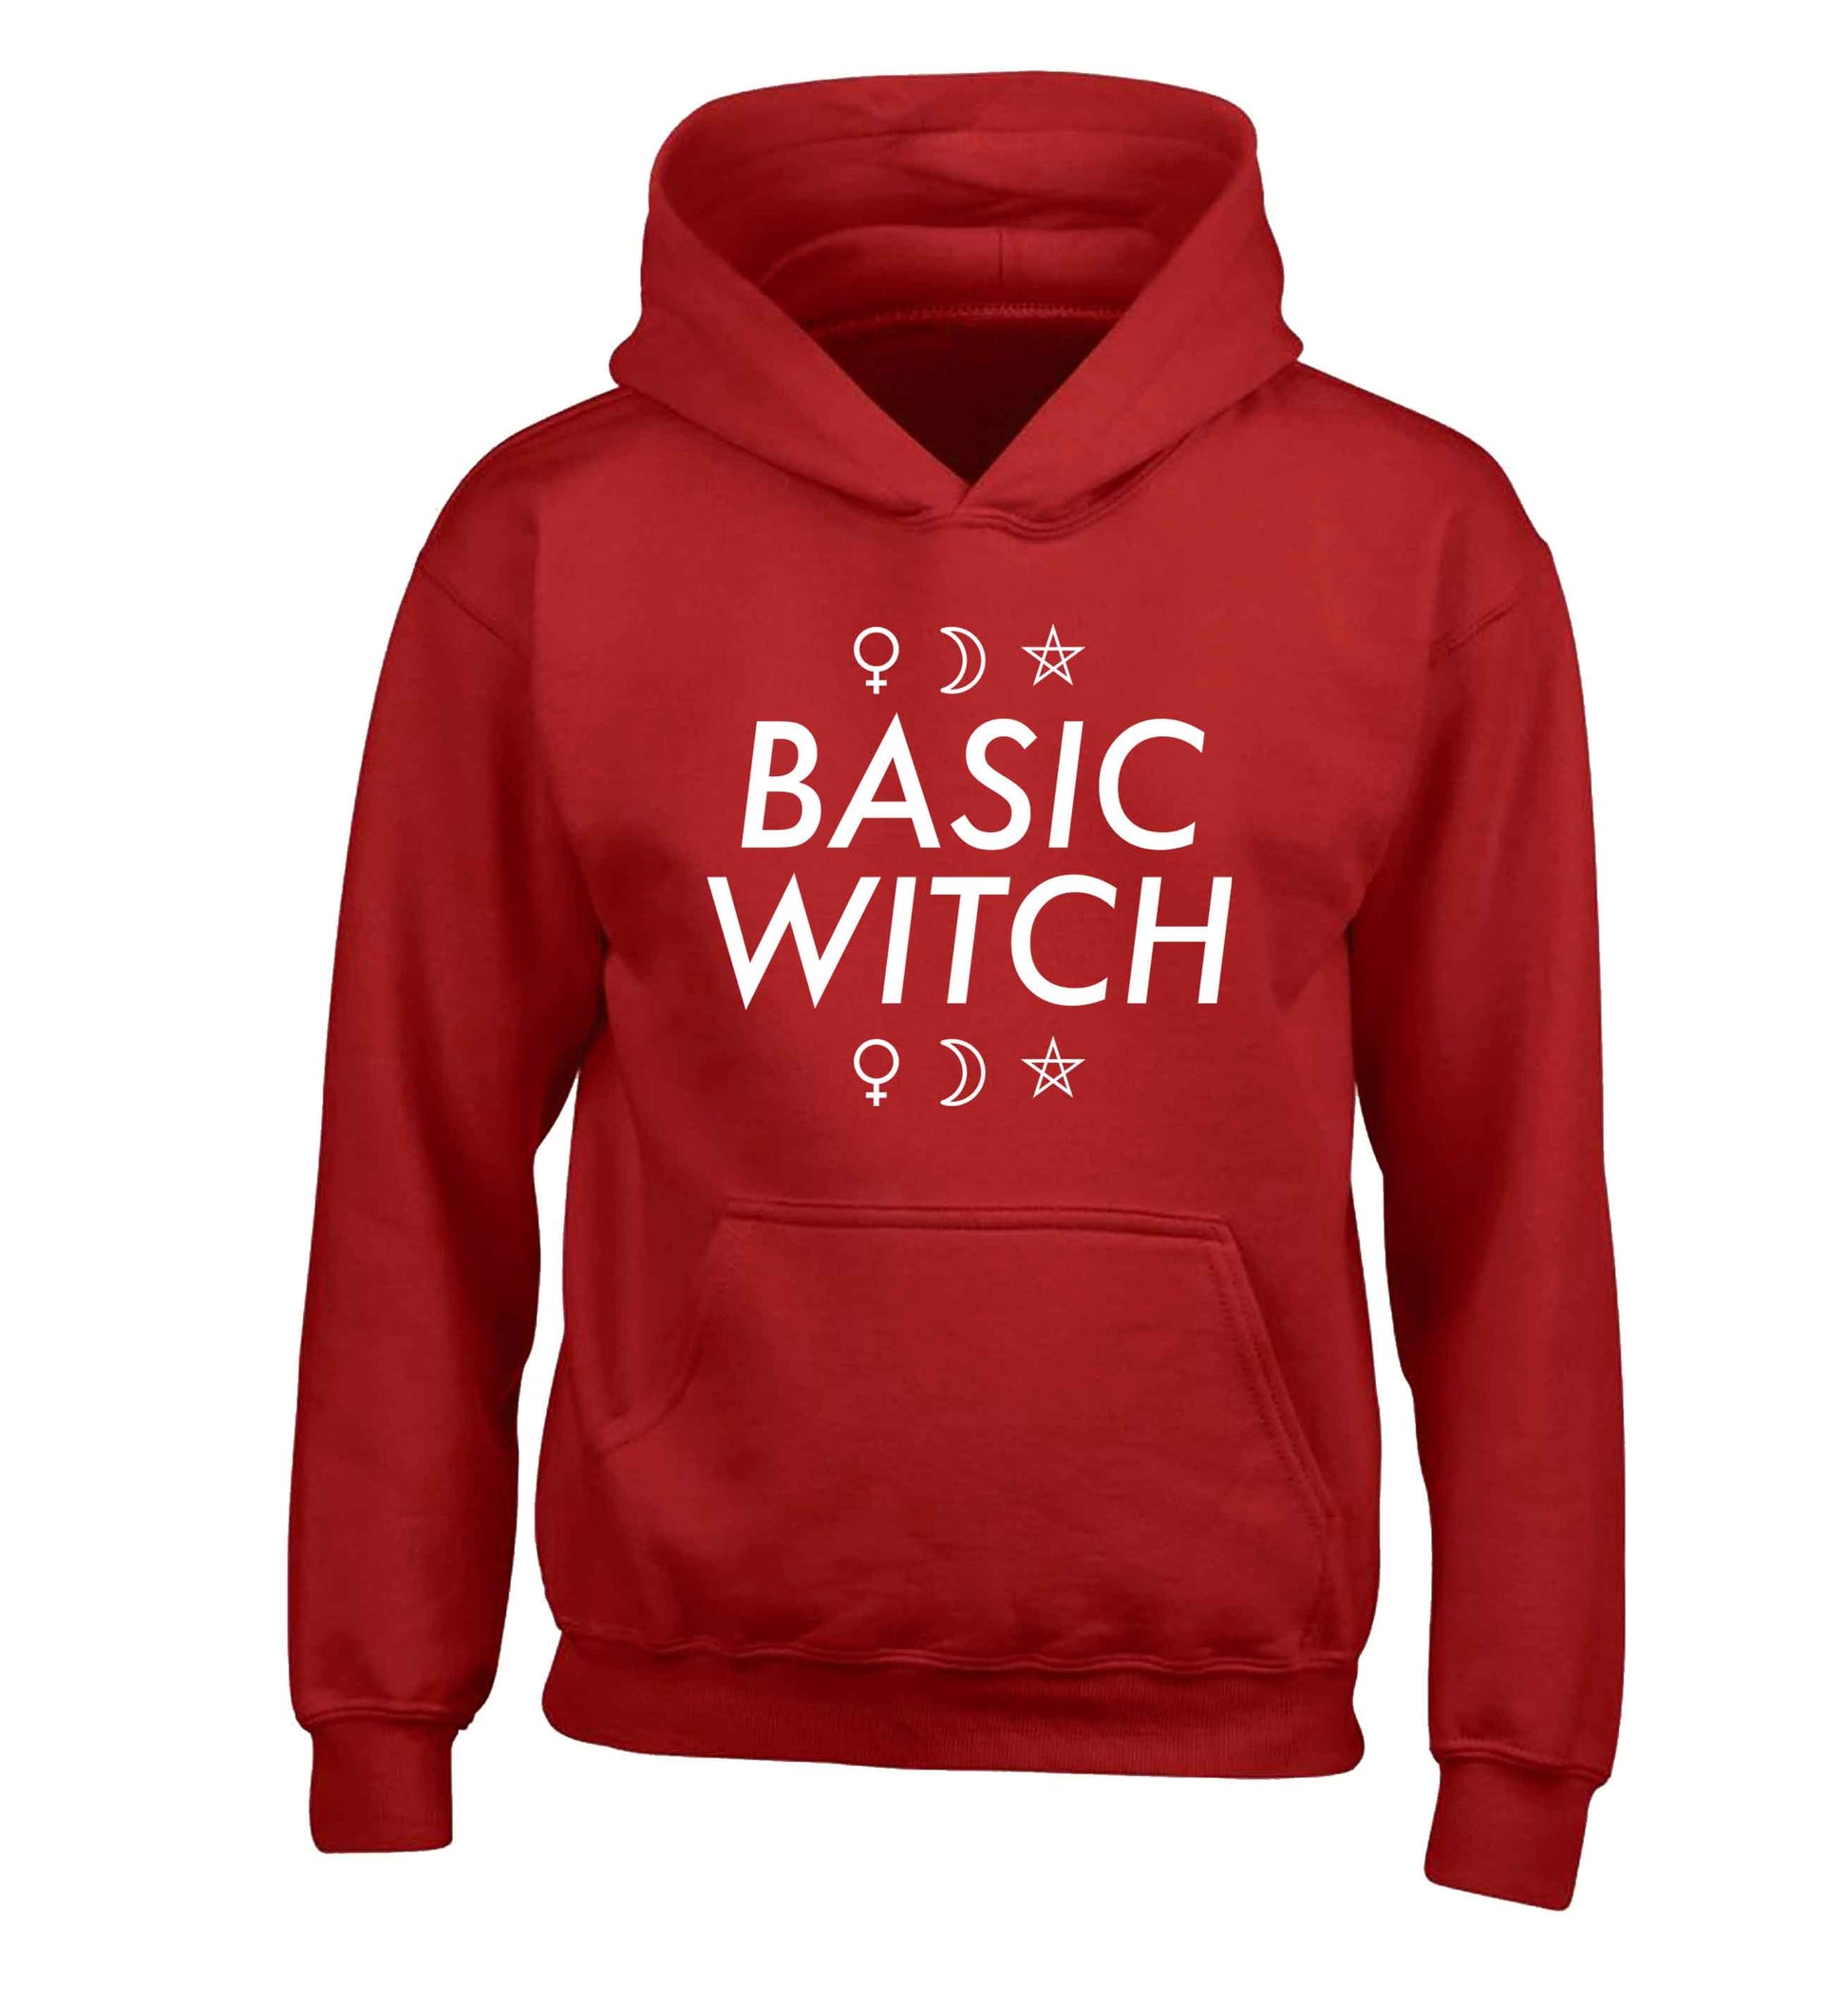 Basic witch 1 children's red hoodie 12-13 Years